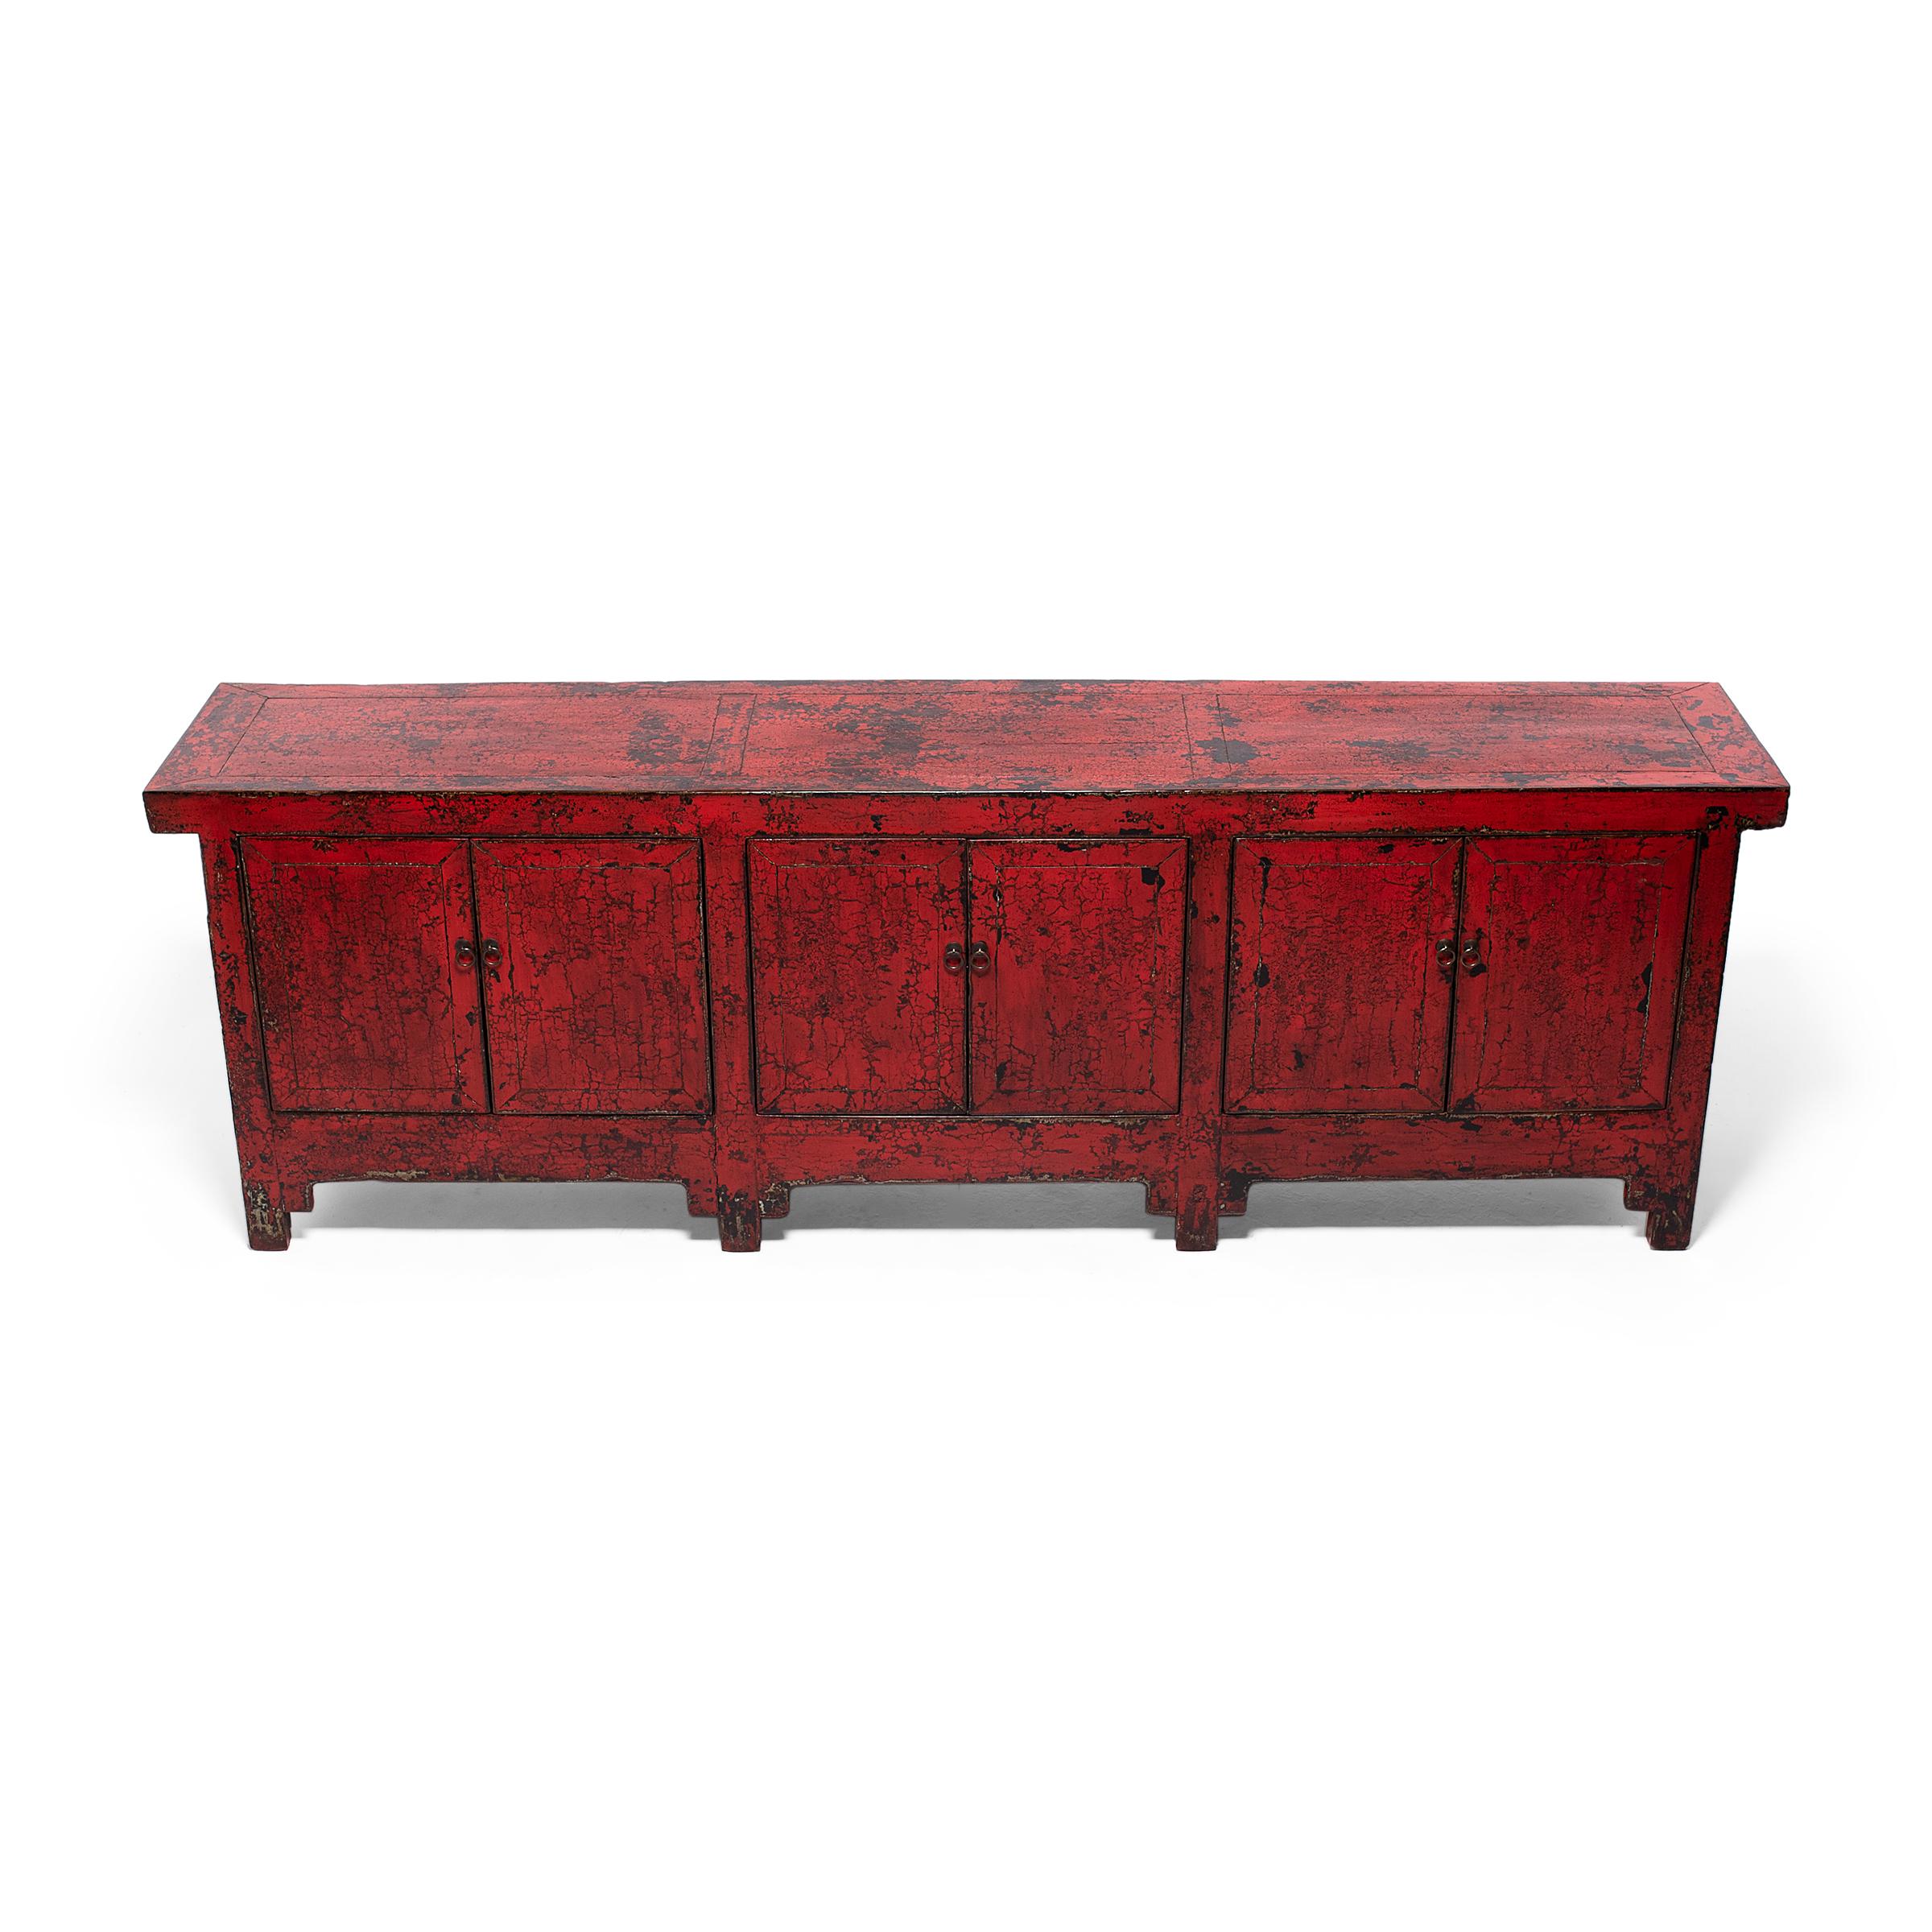 Qing Chinese Red Lacquer Grasslands Coffer, c. 1900